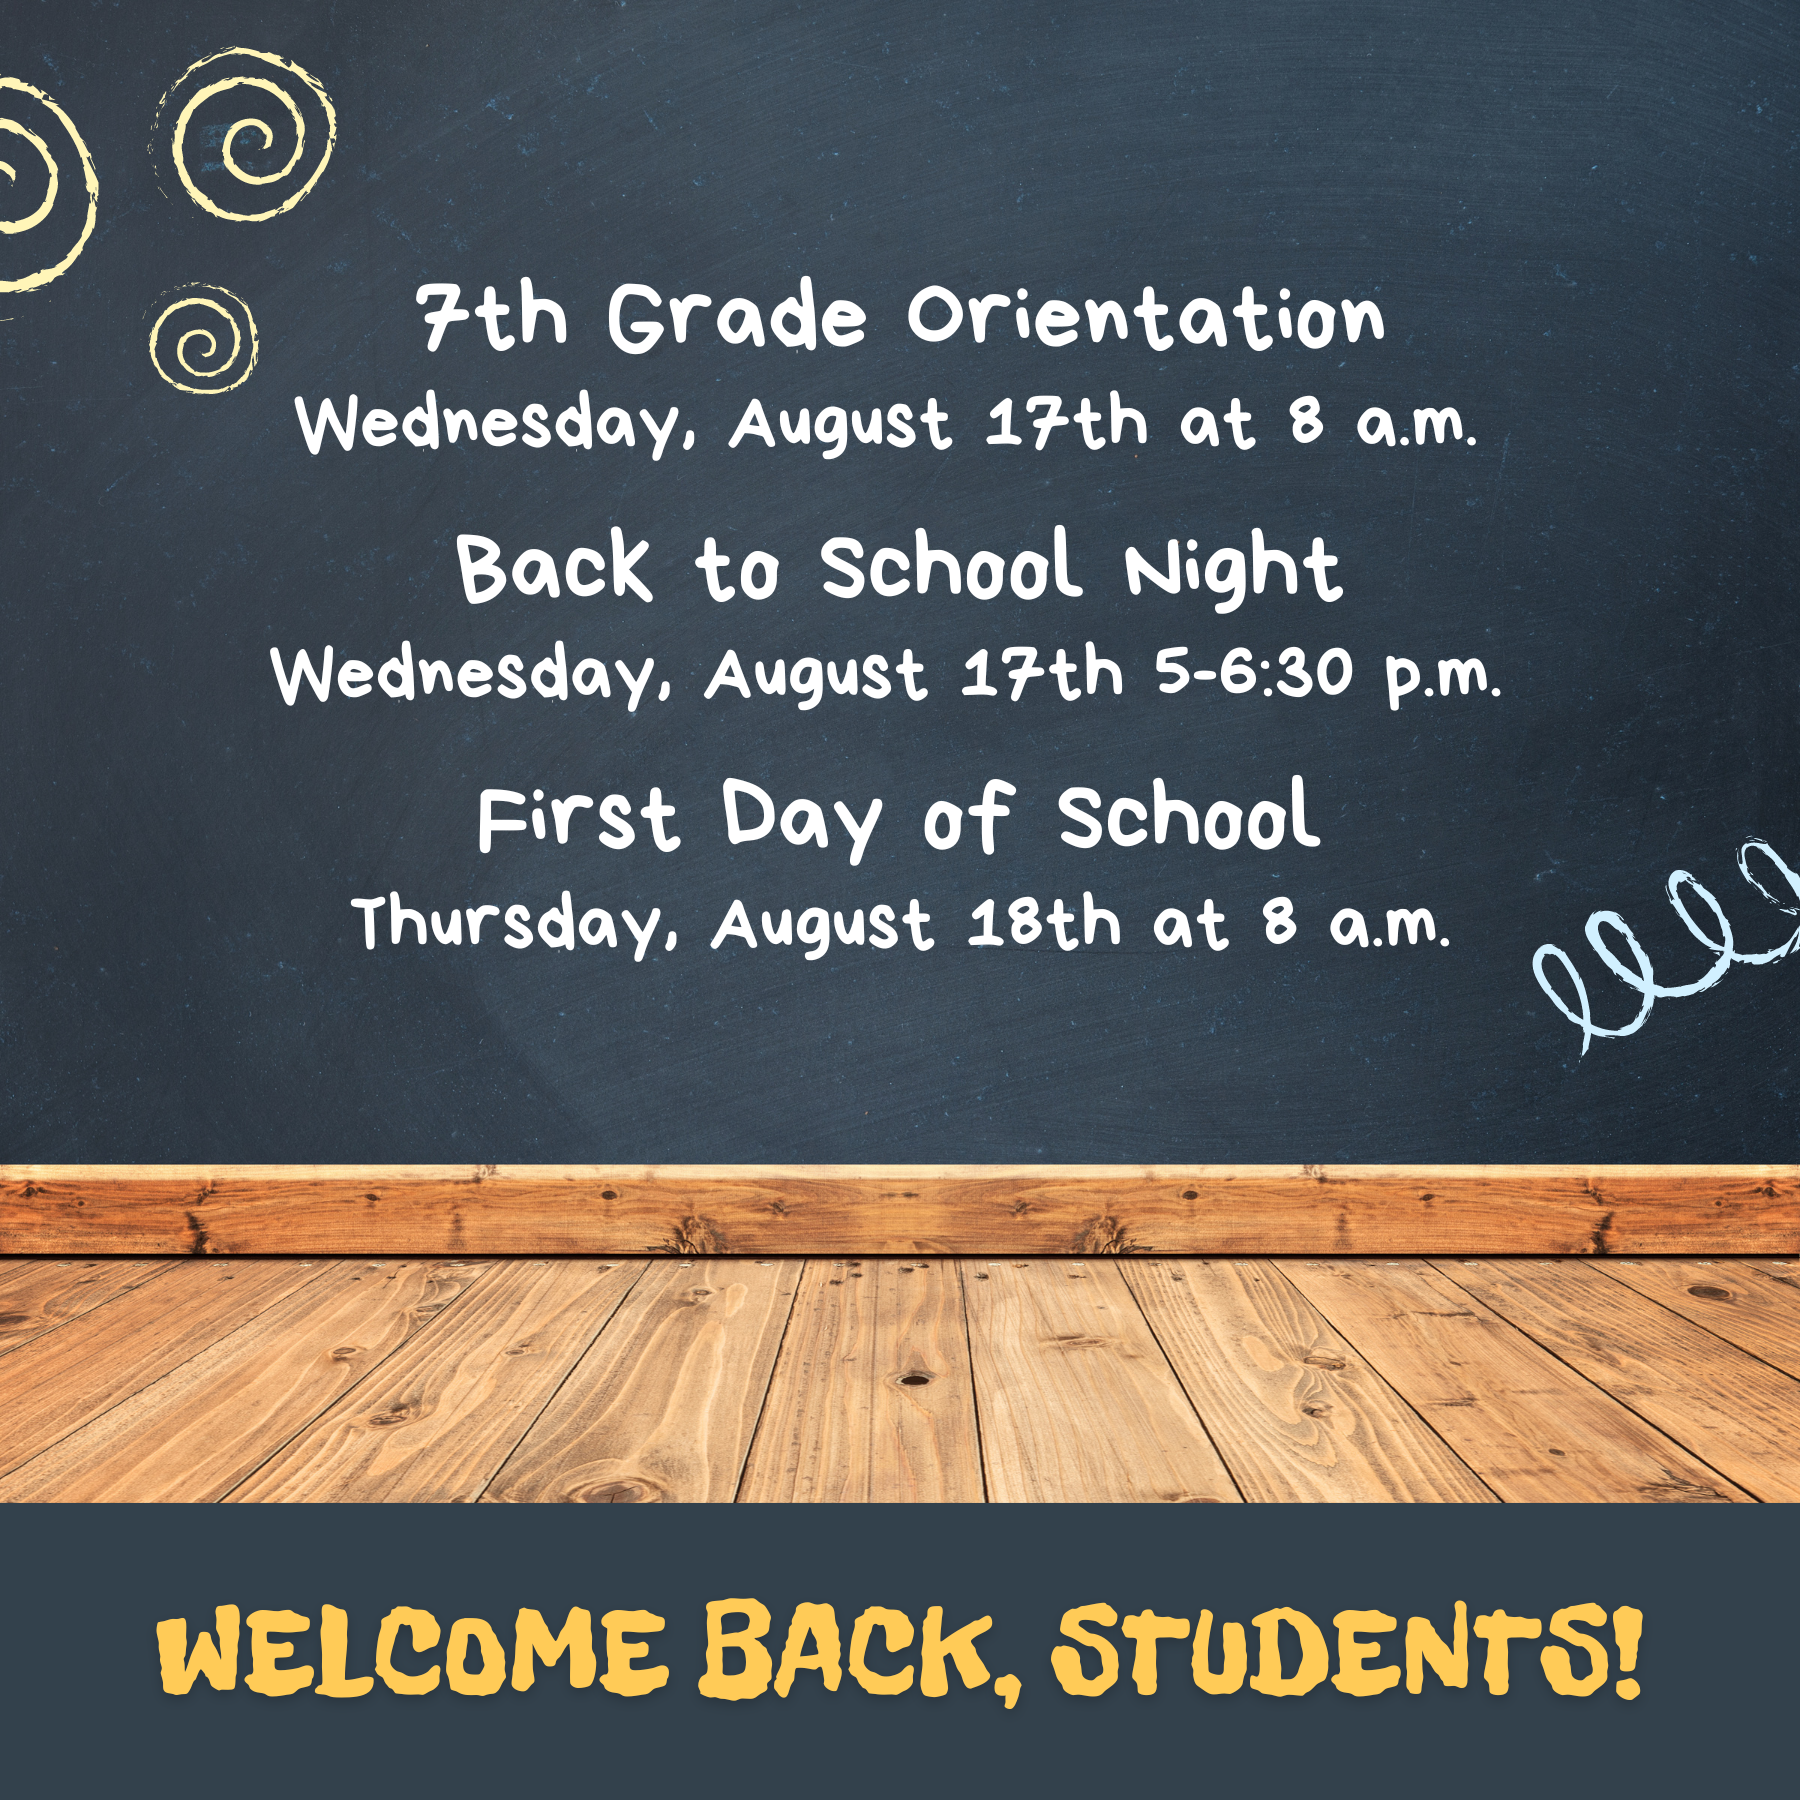 Welcome back, students!